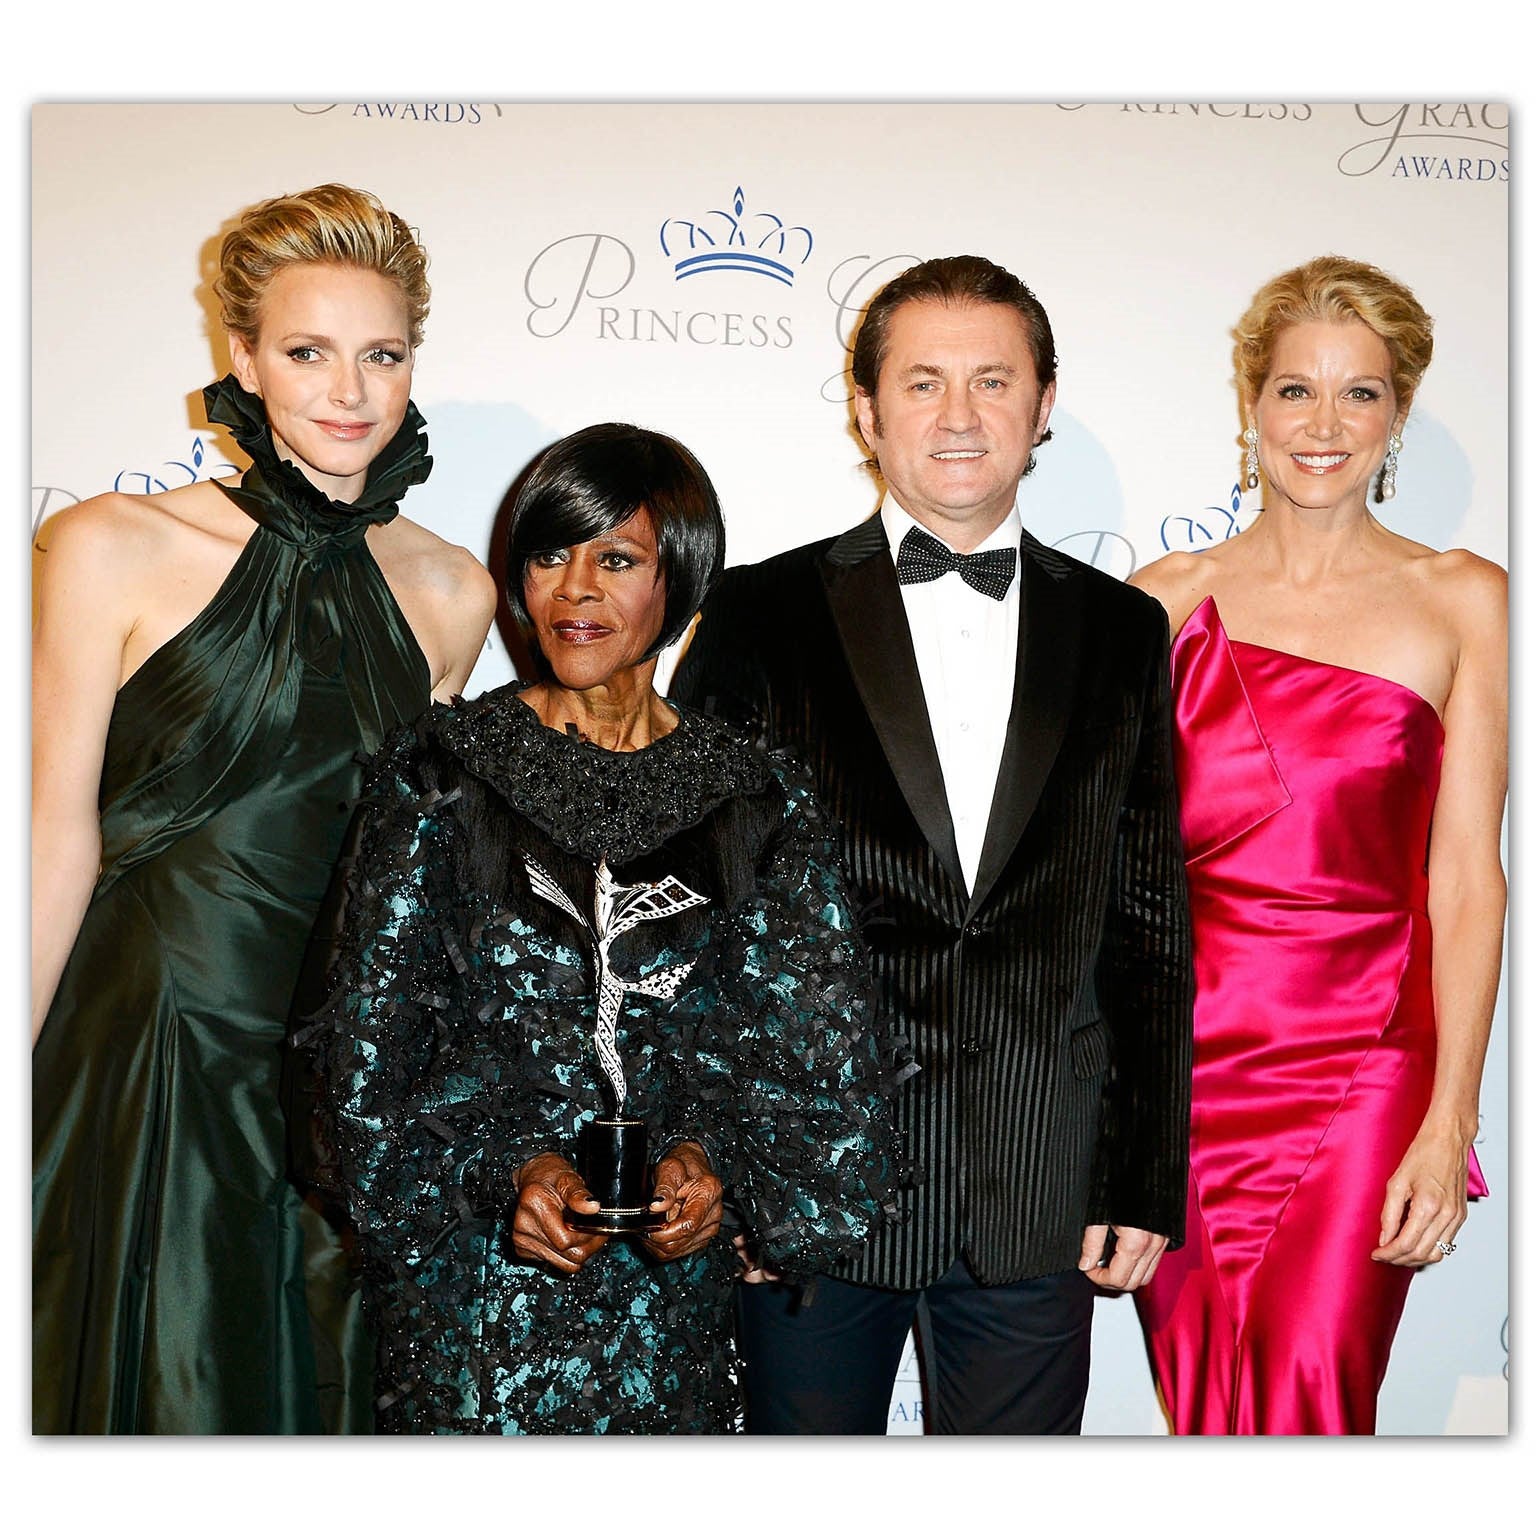 NEW YORK, NY – Princess Charlene of Monaco, Paula Zahn and Alex Soldier present Cicely Tyson with Princess Grace Award, designed and created by Alex Soldier.